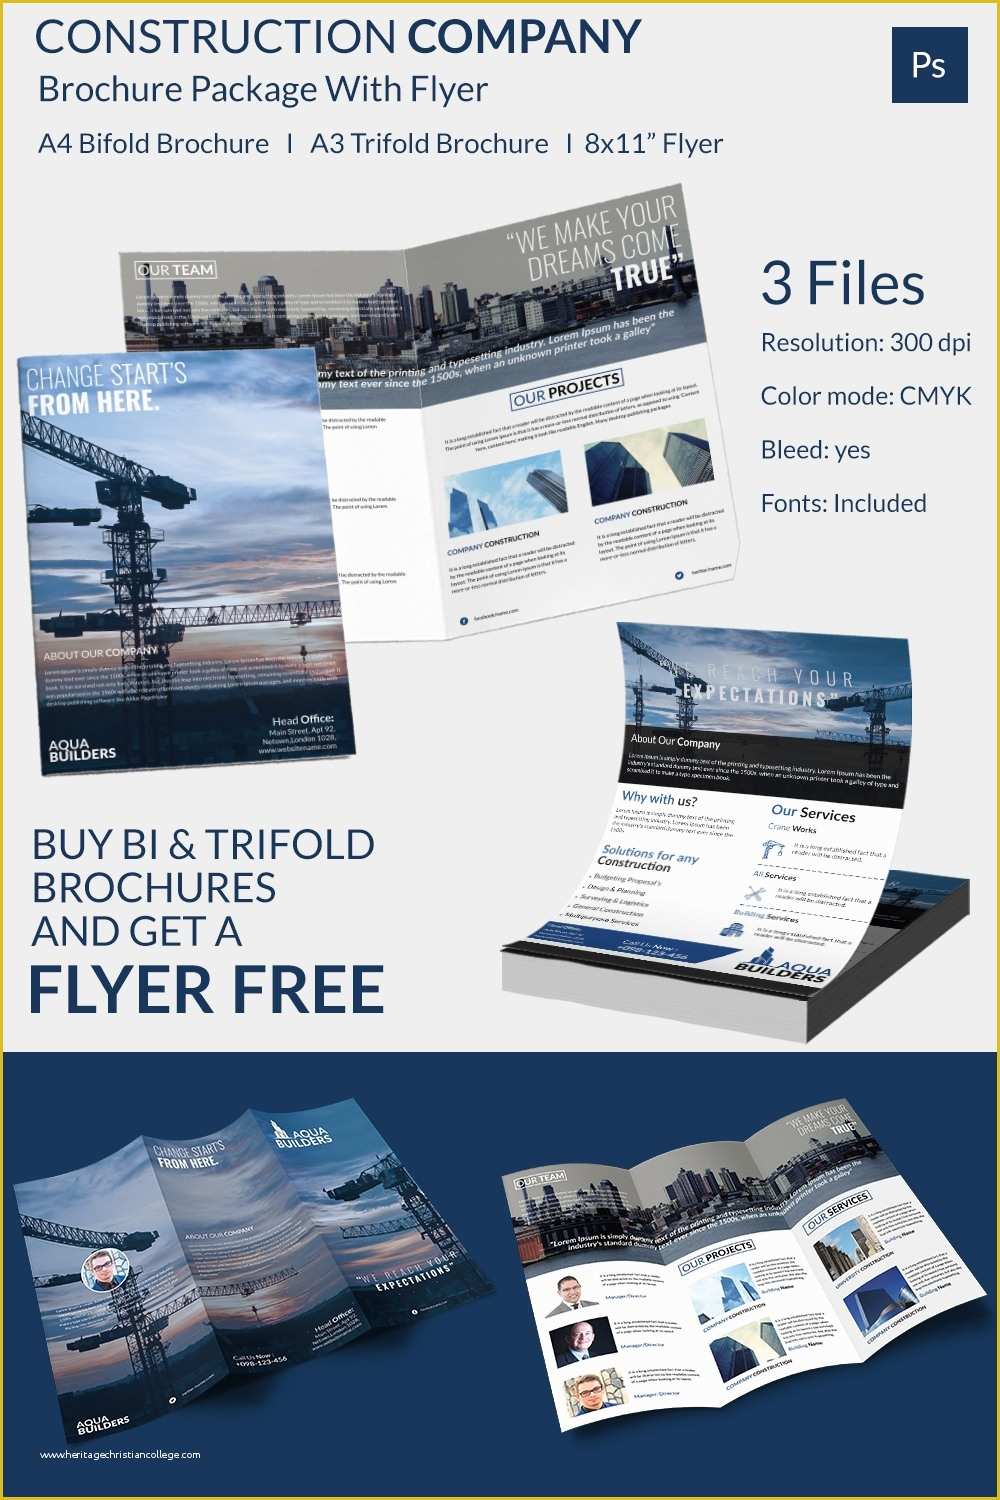 Construction Company Template Free Of 11 top Construction Pany Brochure Templates